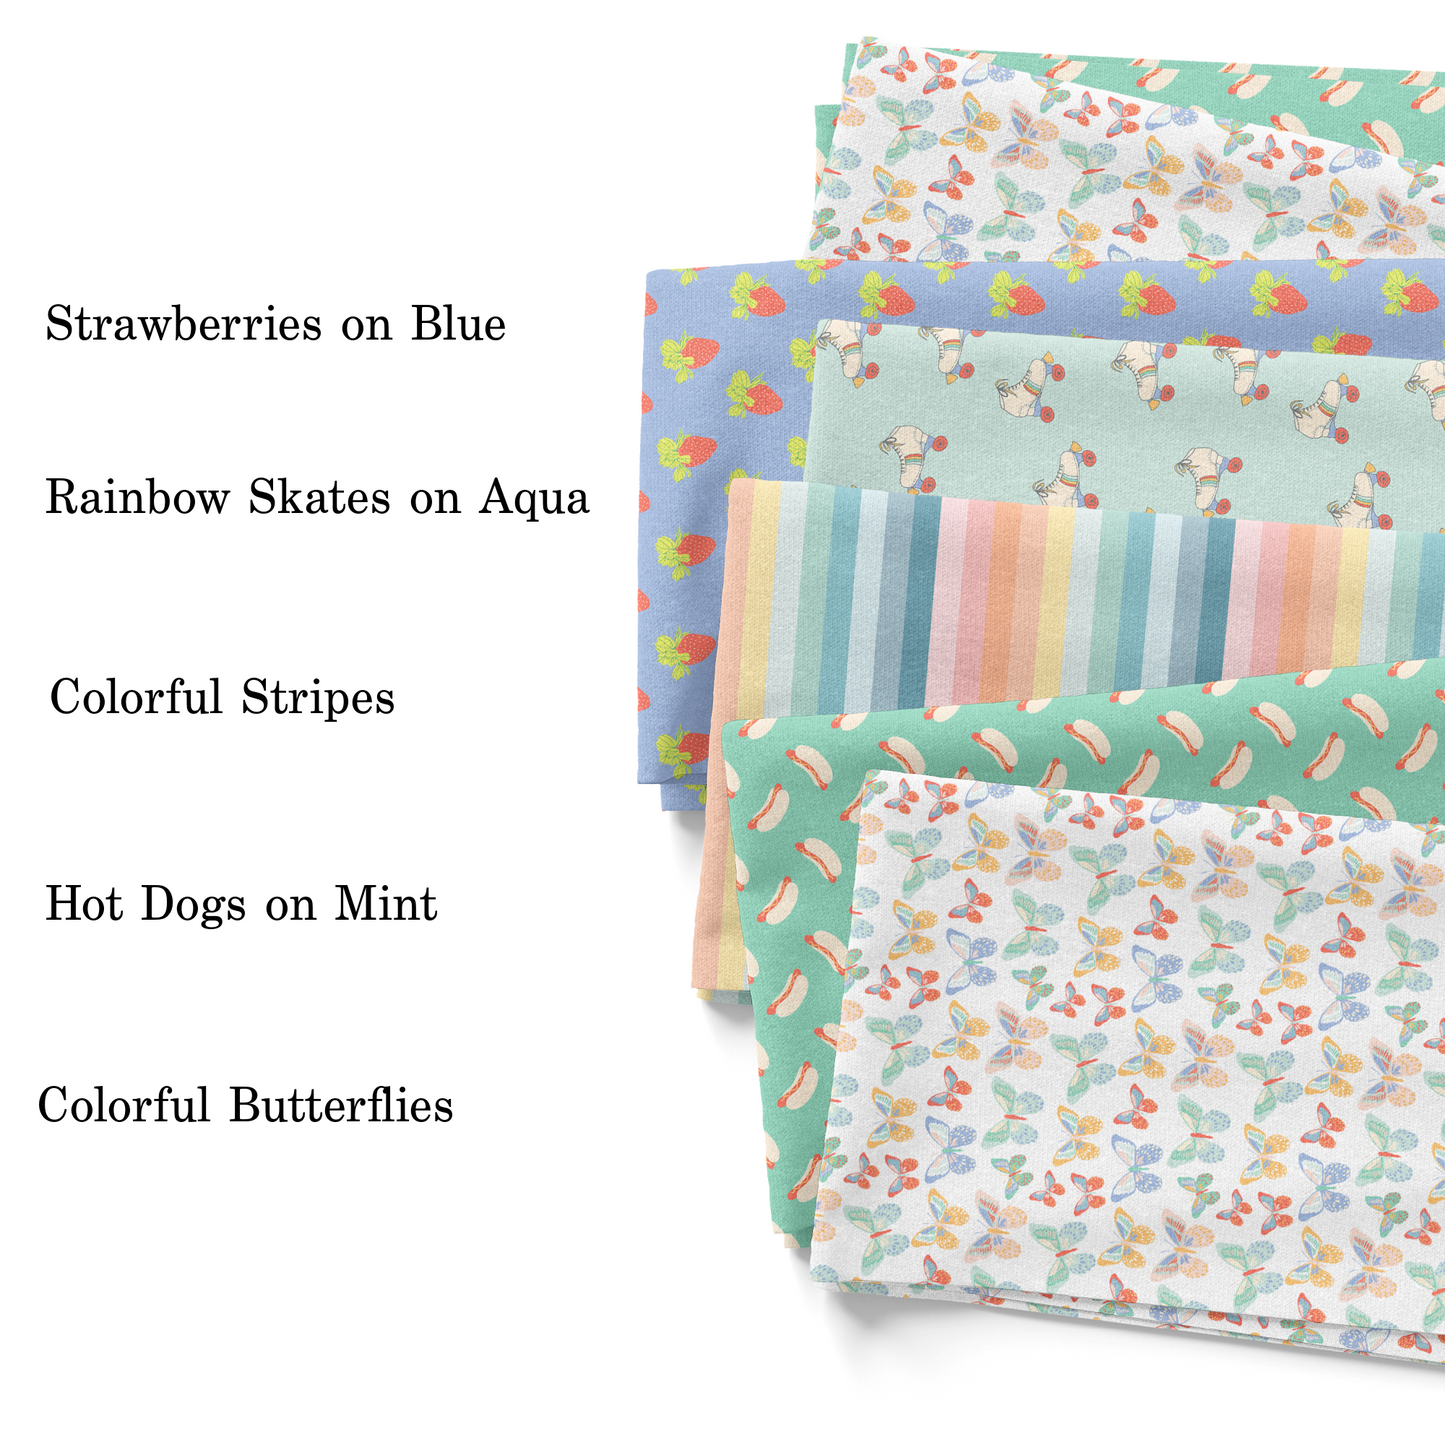 Summer Fabric Designs by Indy Bloom 